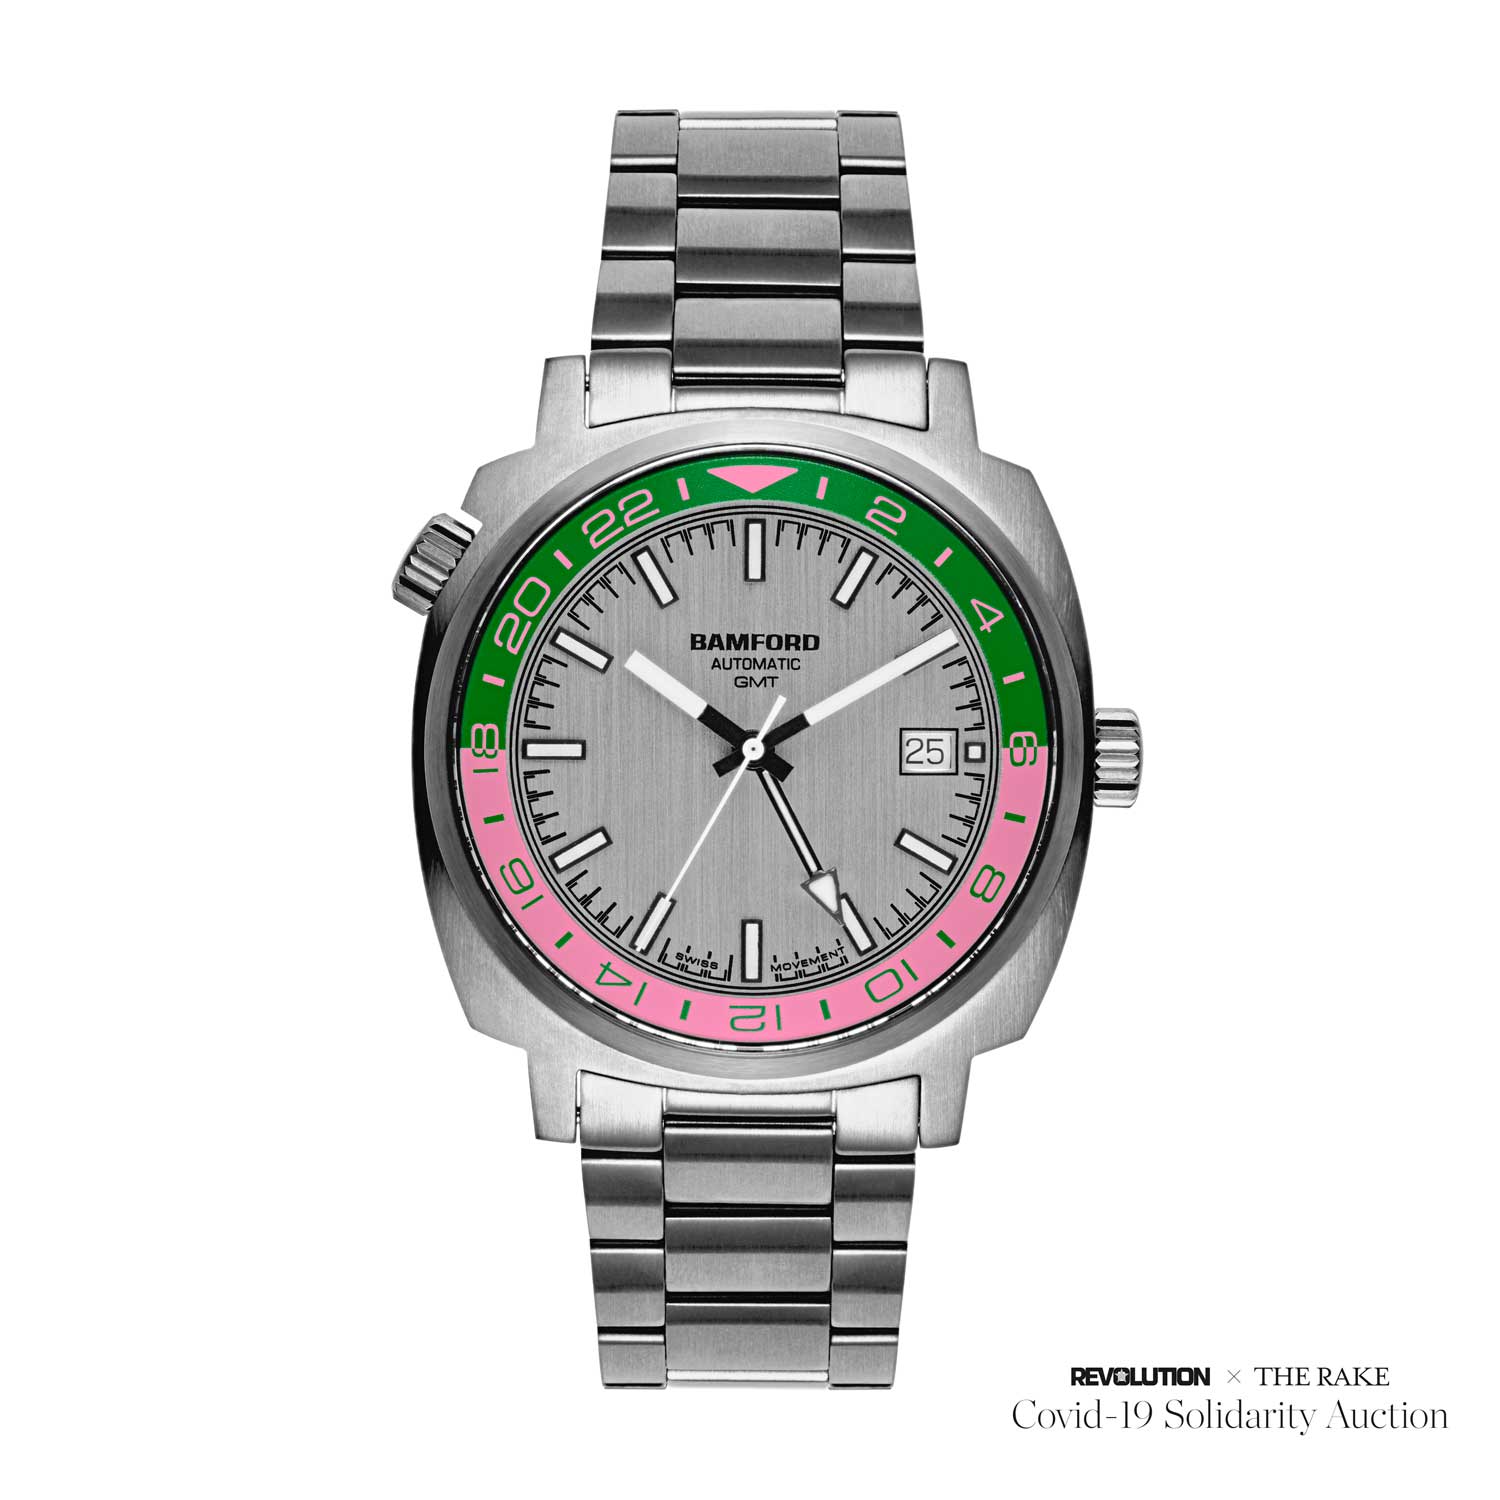 Unique Pink and Green Bamford GMT for Revolution x The Rake Covid-19 Solidarity Auction